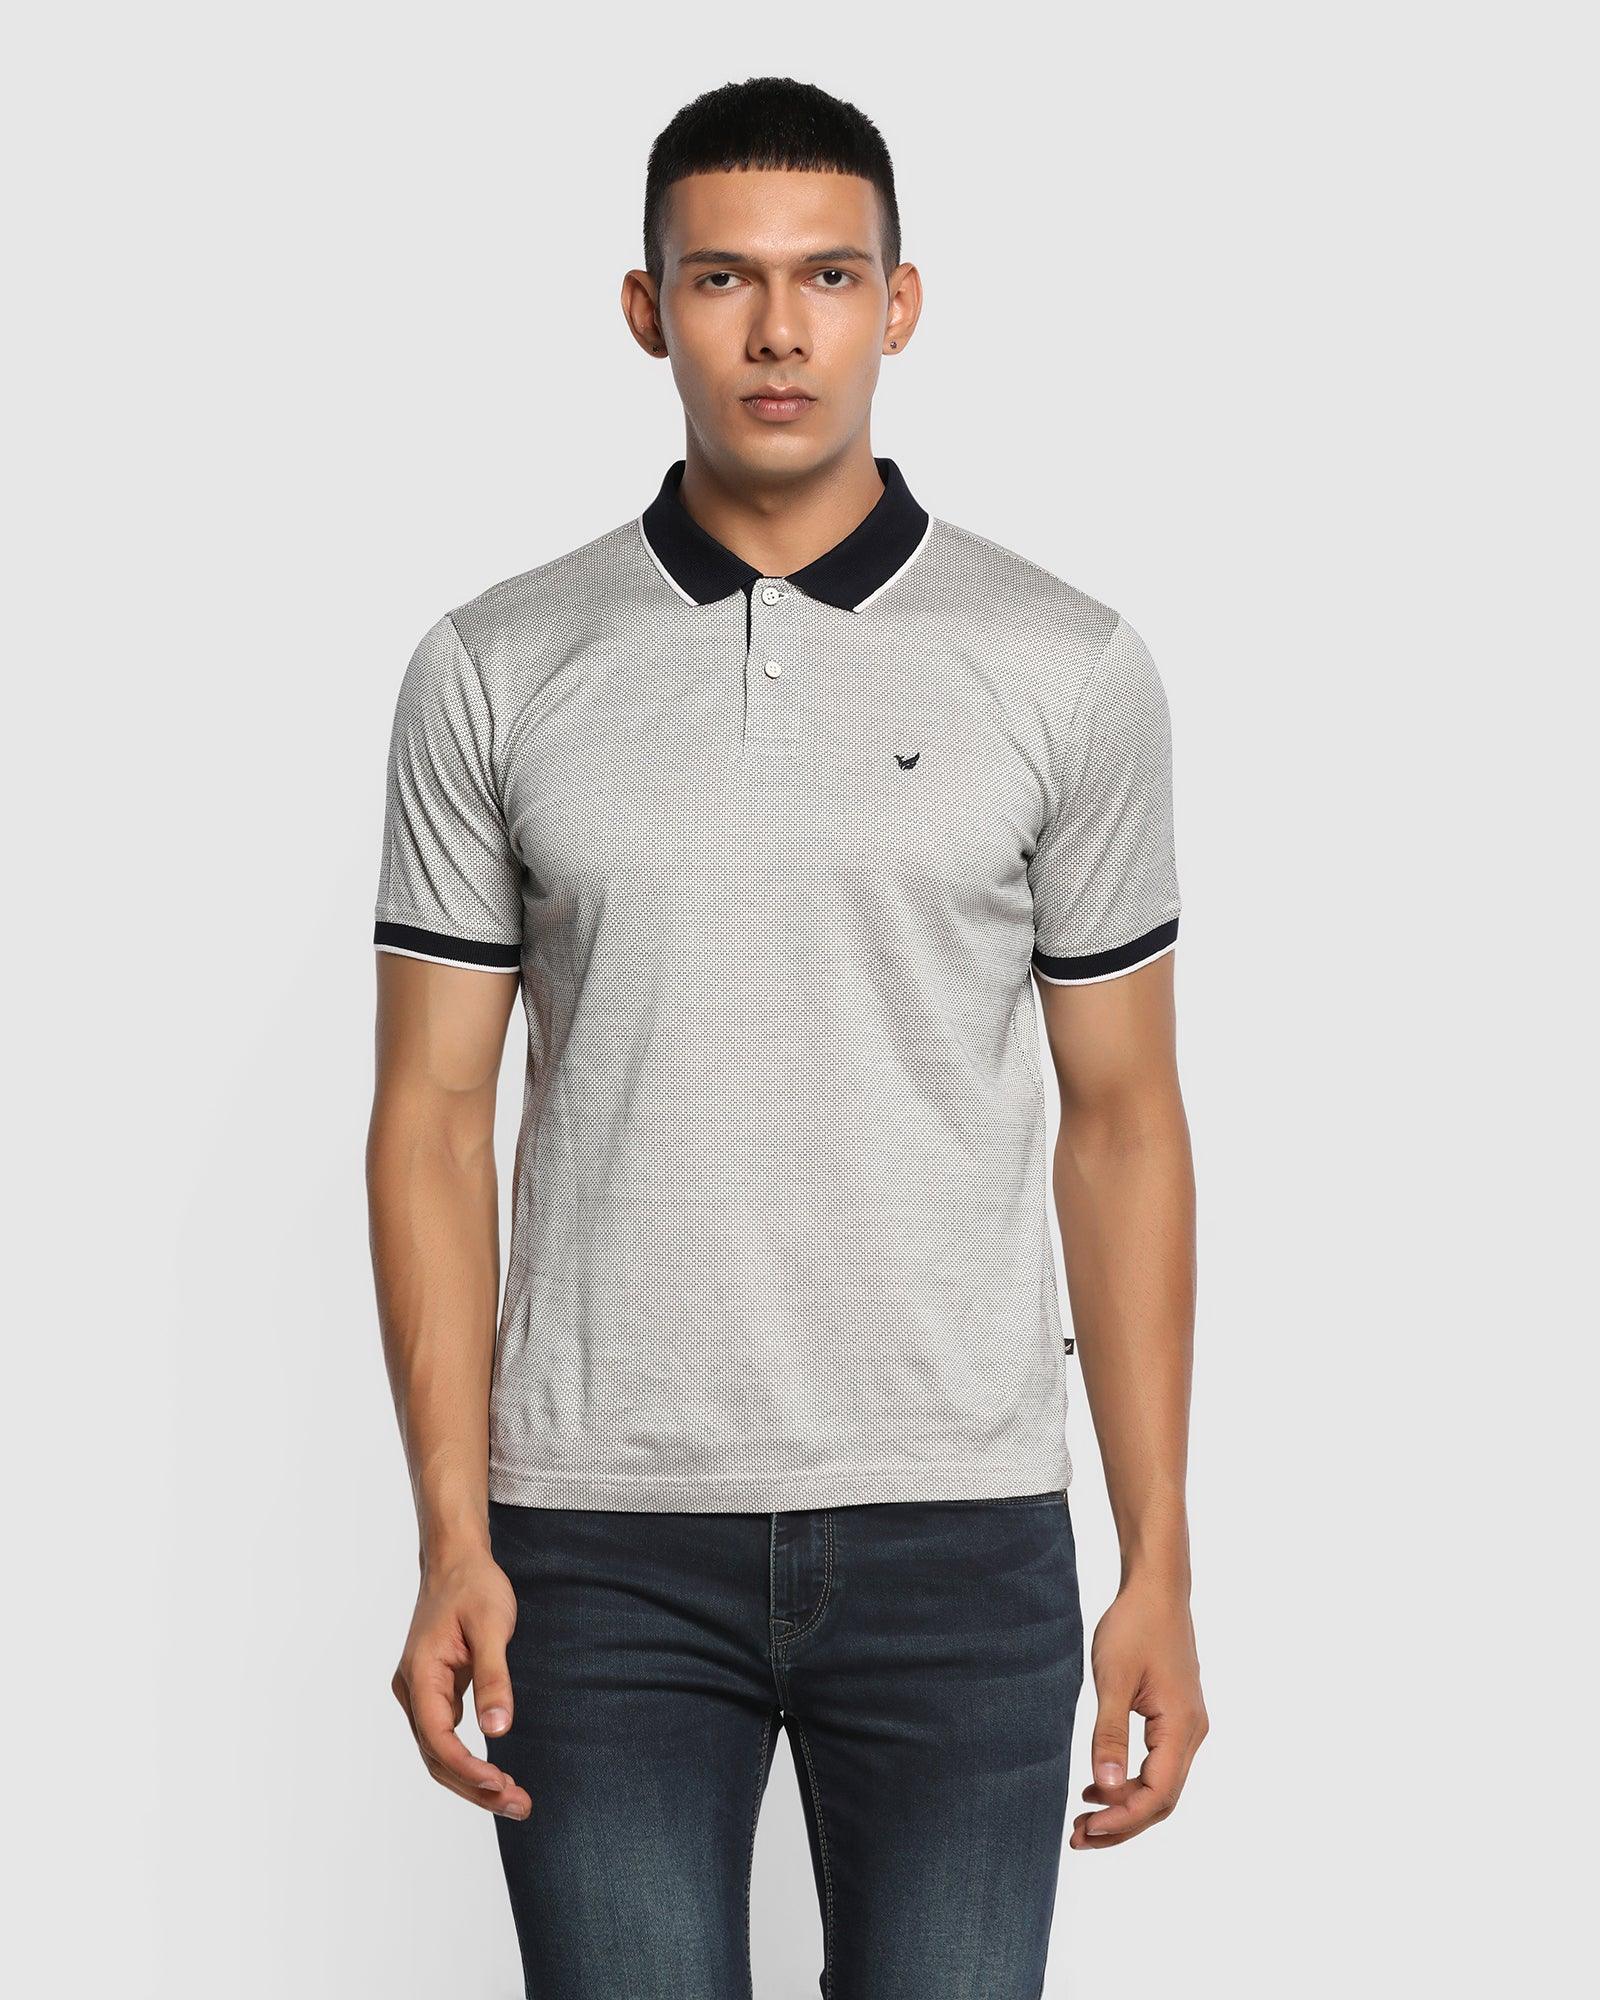 Polo Navy Textured T-Shirt - Connor